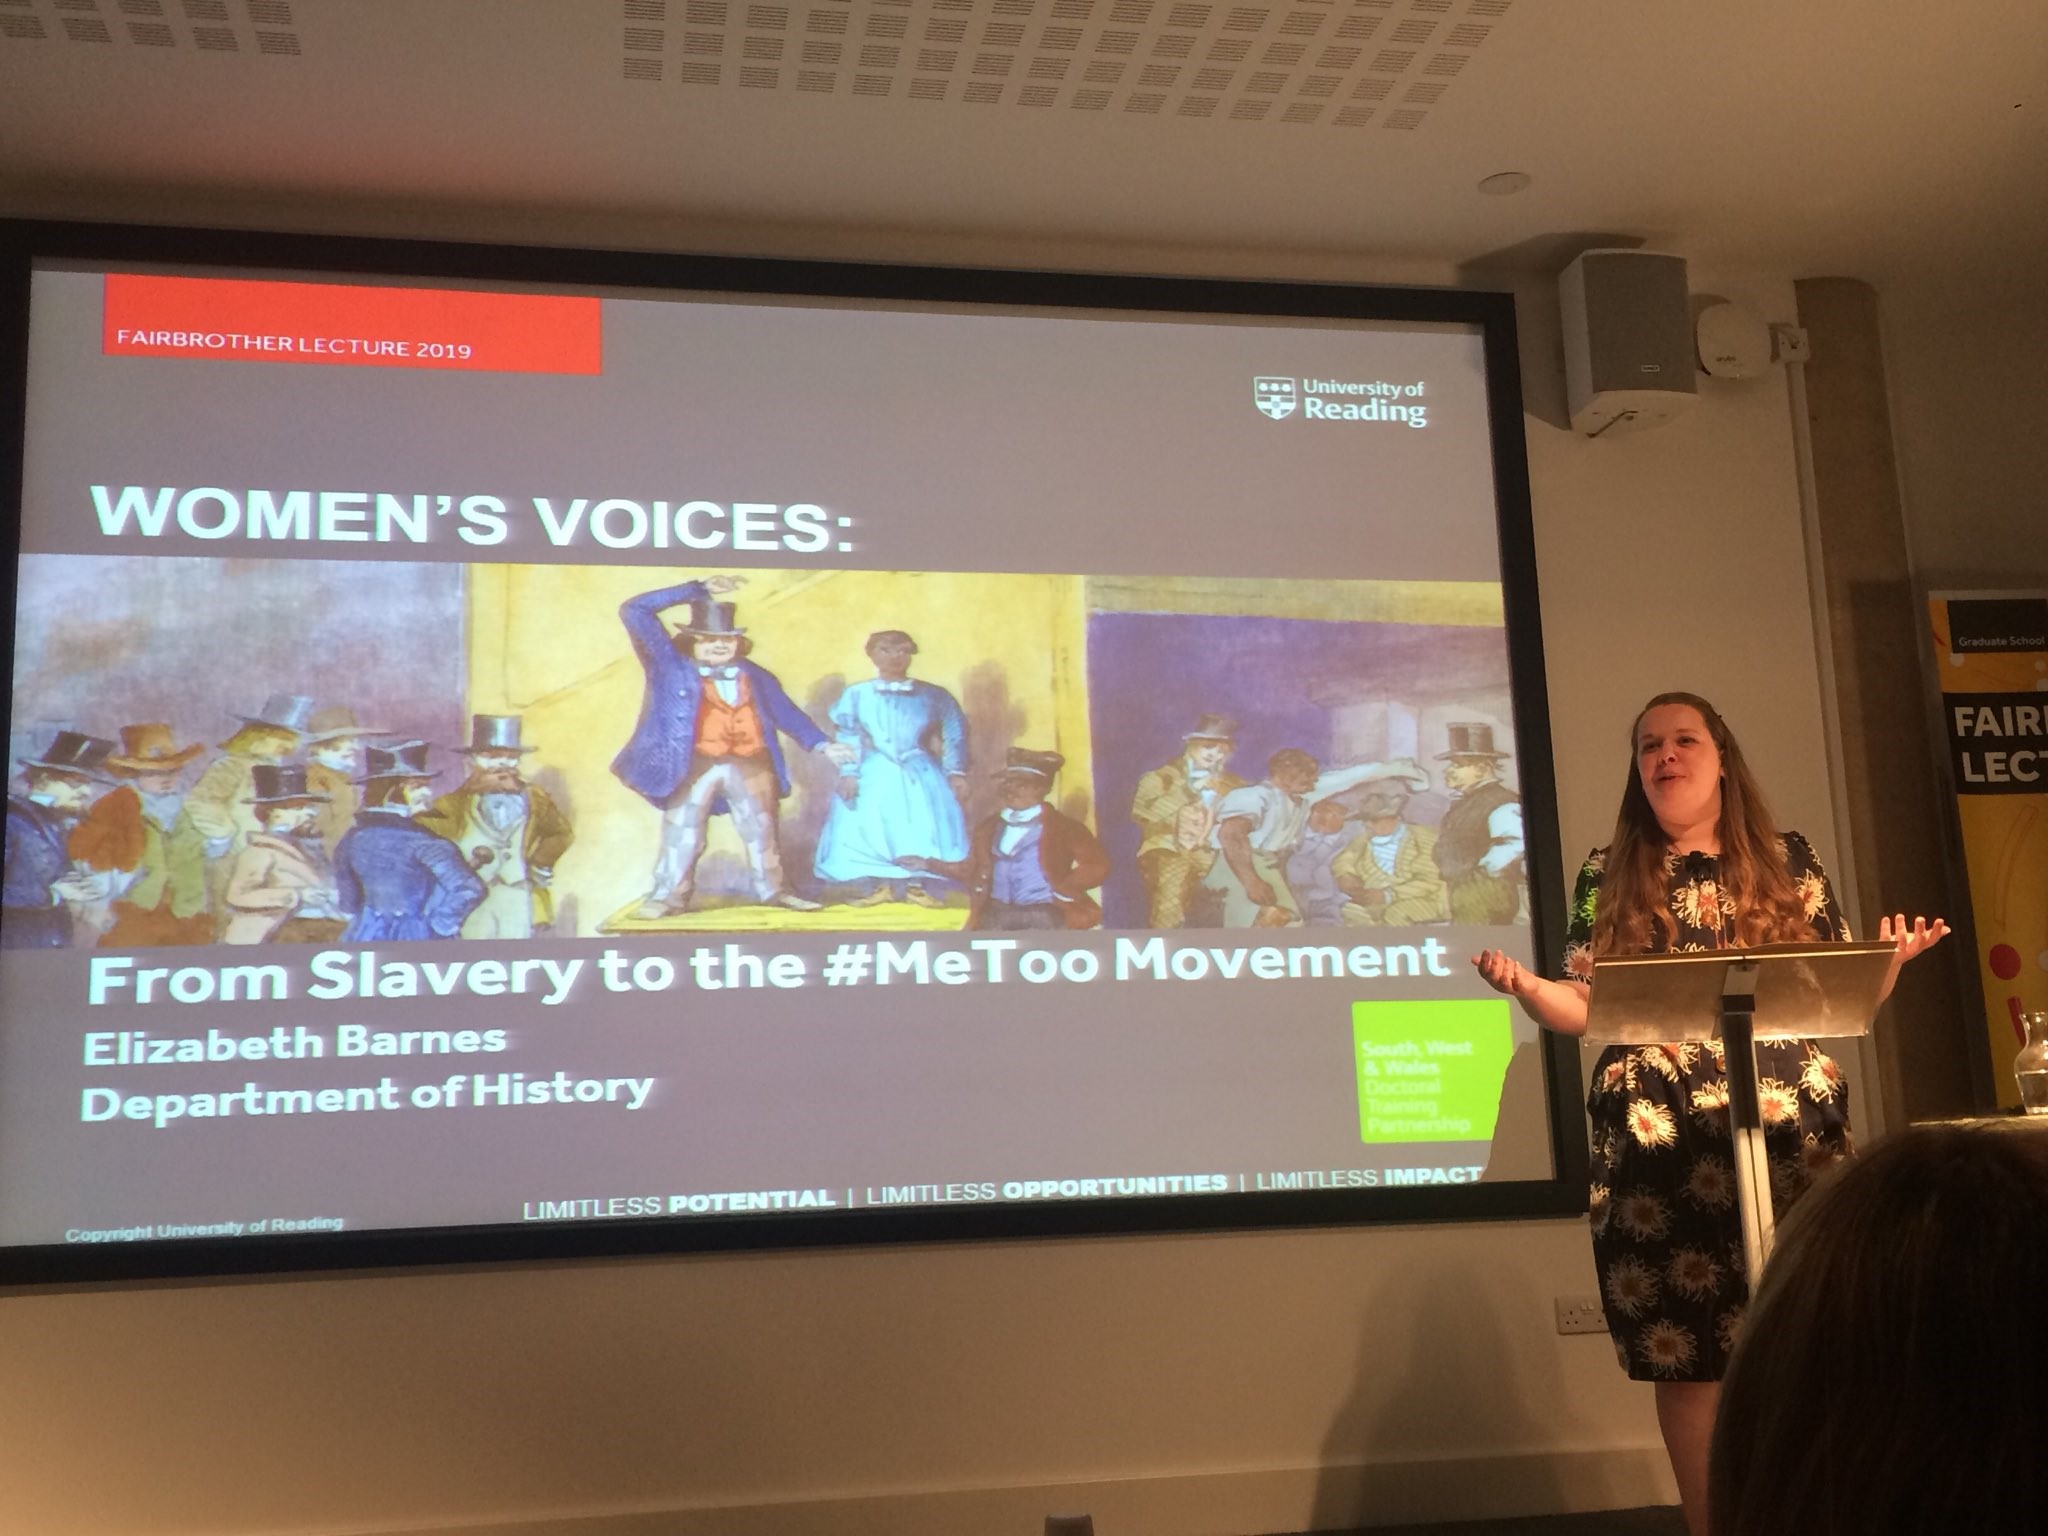 Liz Barnes gives lecture: with PowerPoint slideshow@ Women's Voices: From Slavery to the #MeToo Movement